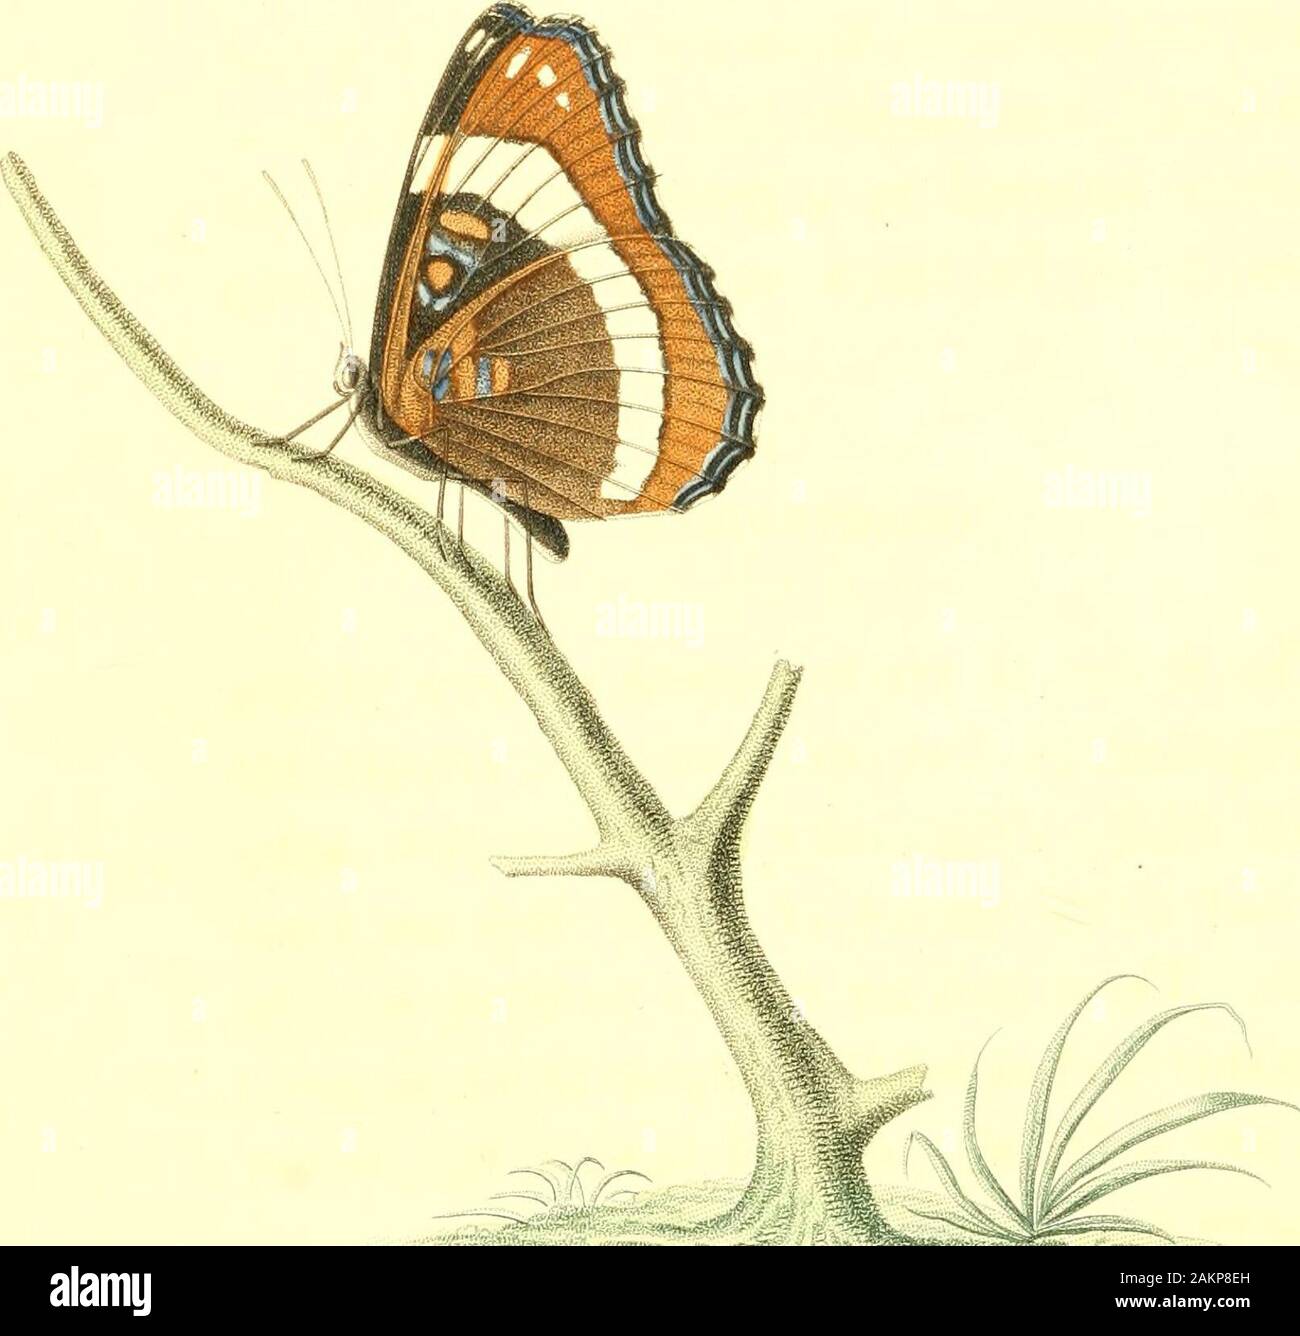 American entomology, or, Descriptions of the insects of North America : illustrated by coloured figures from original drawings executed from nature . Drawn /V WJi: Wrrd. T?3 tn&lt;//rnY,/ Av /.//n LIMENITIS. Papilio, Lin.—Nymphalis, Latr. GENERIC CHARACTER. Antennae gradually clubbed; club slender,hardly compressed, elongate-obconic; palpi notelongated, second joint not much compressed, theanterior margin not remarkably broader; anteriorpair of feet spurious; wings not very much longerthan broad; four hinder feet with double nails;abdomen received in a groove, formed by thedilatation of the in Stock Photo